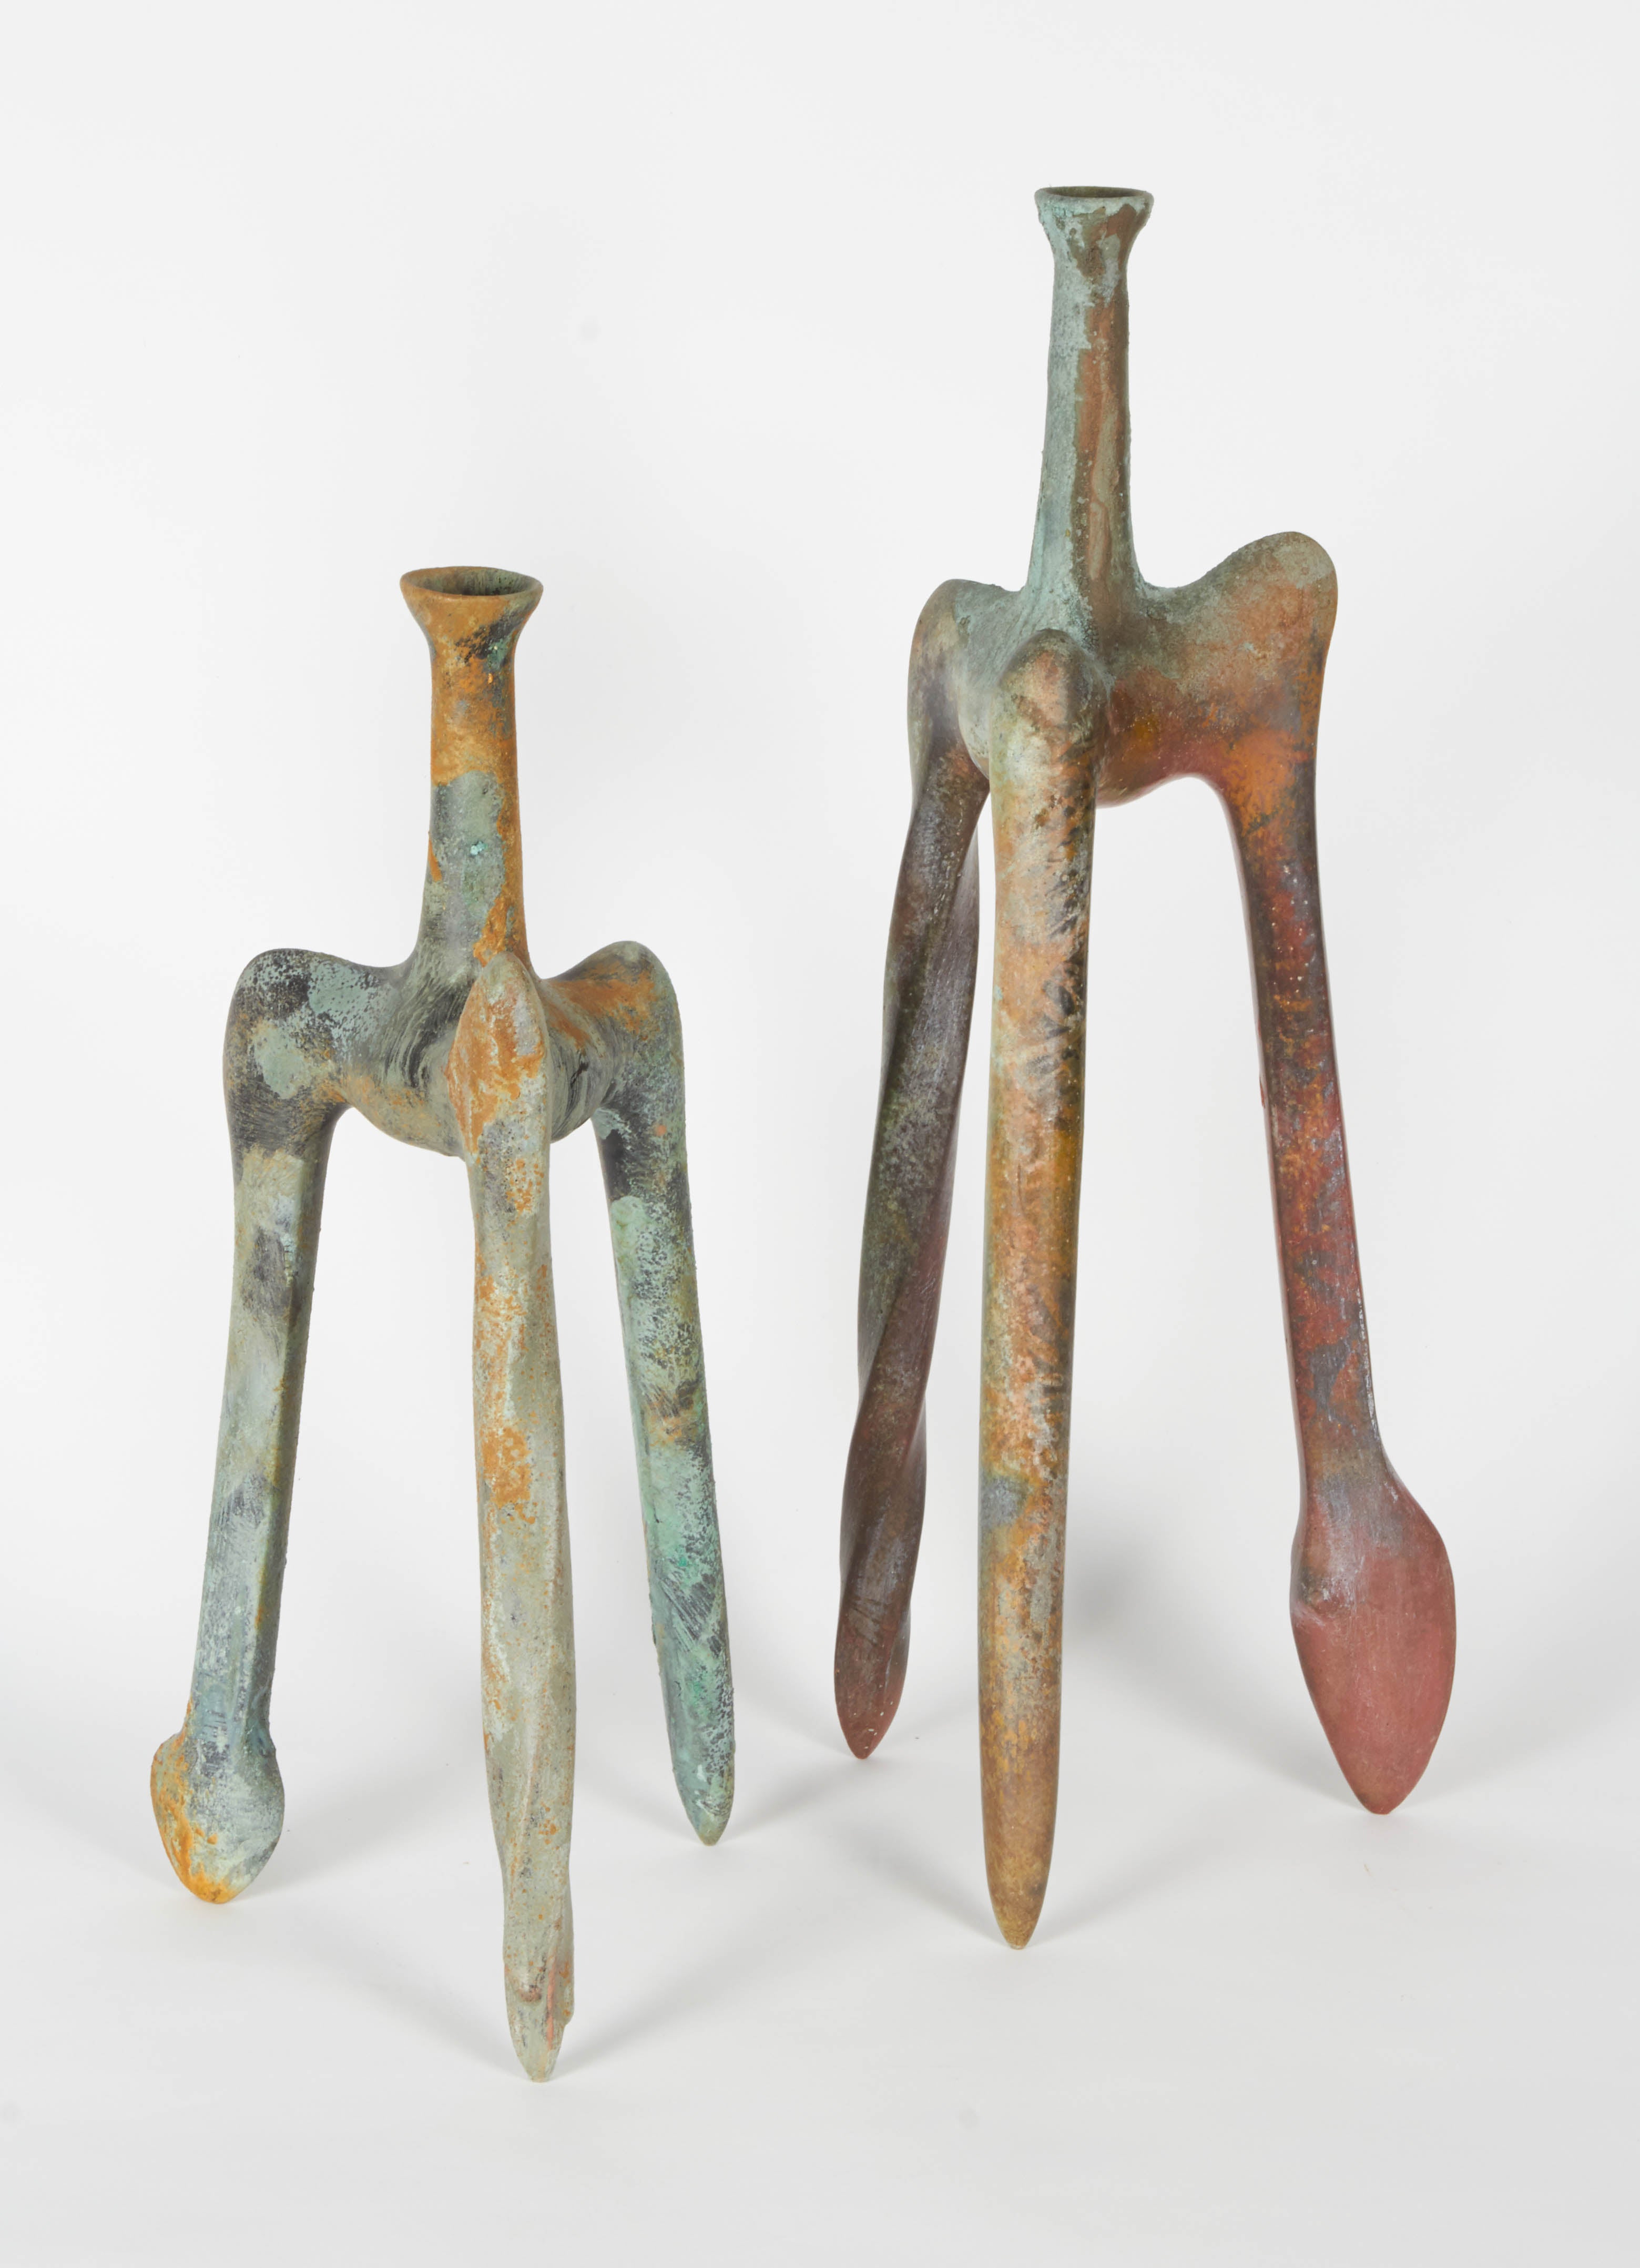 Modern Richard Hirsch Ceramic Vessel and Stand, Tripod Vessels Collection, 1987 - 1994 For Sale